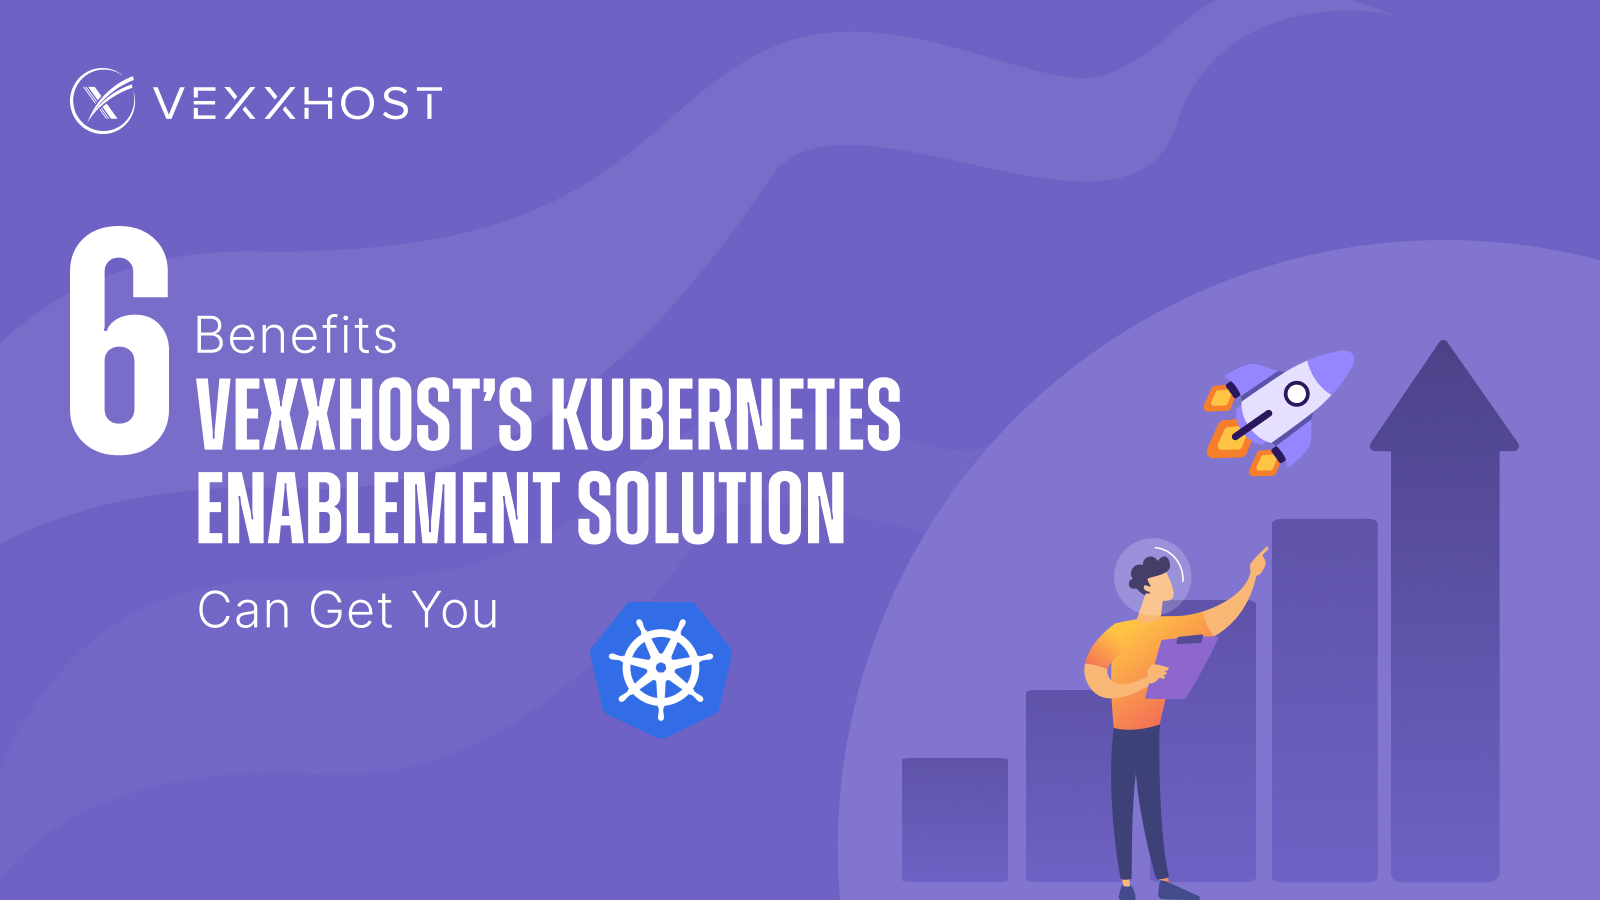 6 Benefits VEXXHOST’s Kubernetes Enablement Solution Can Get You